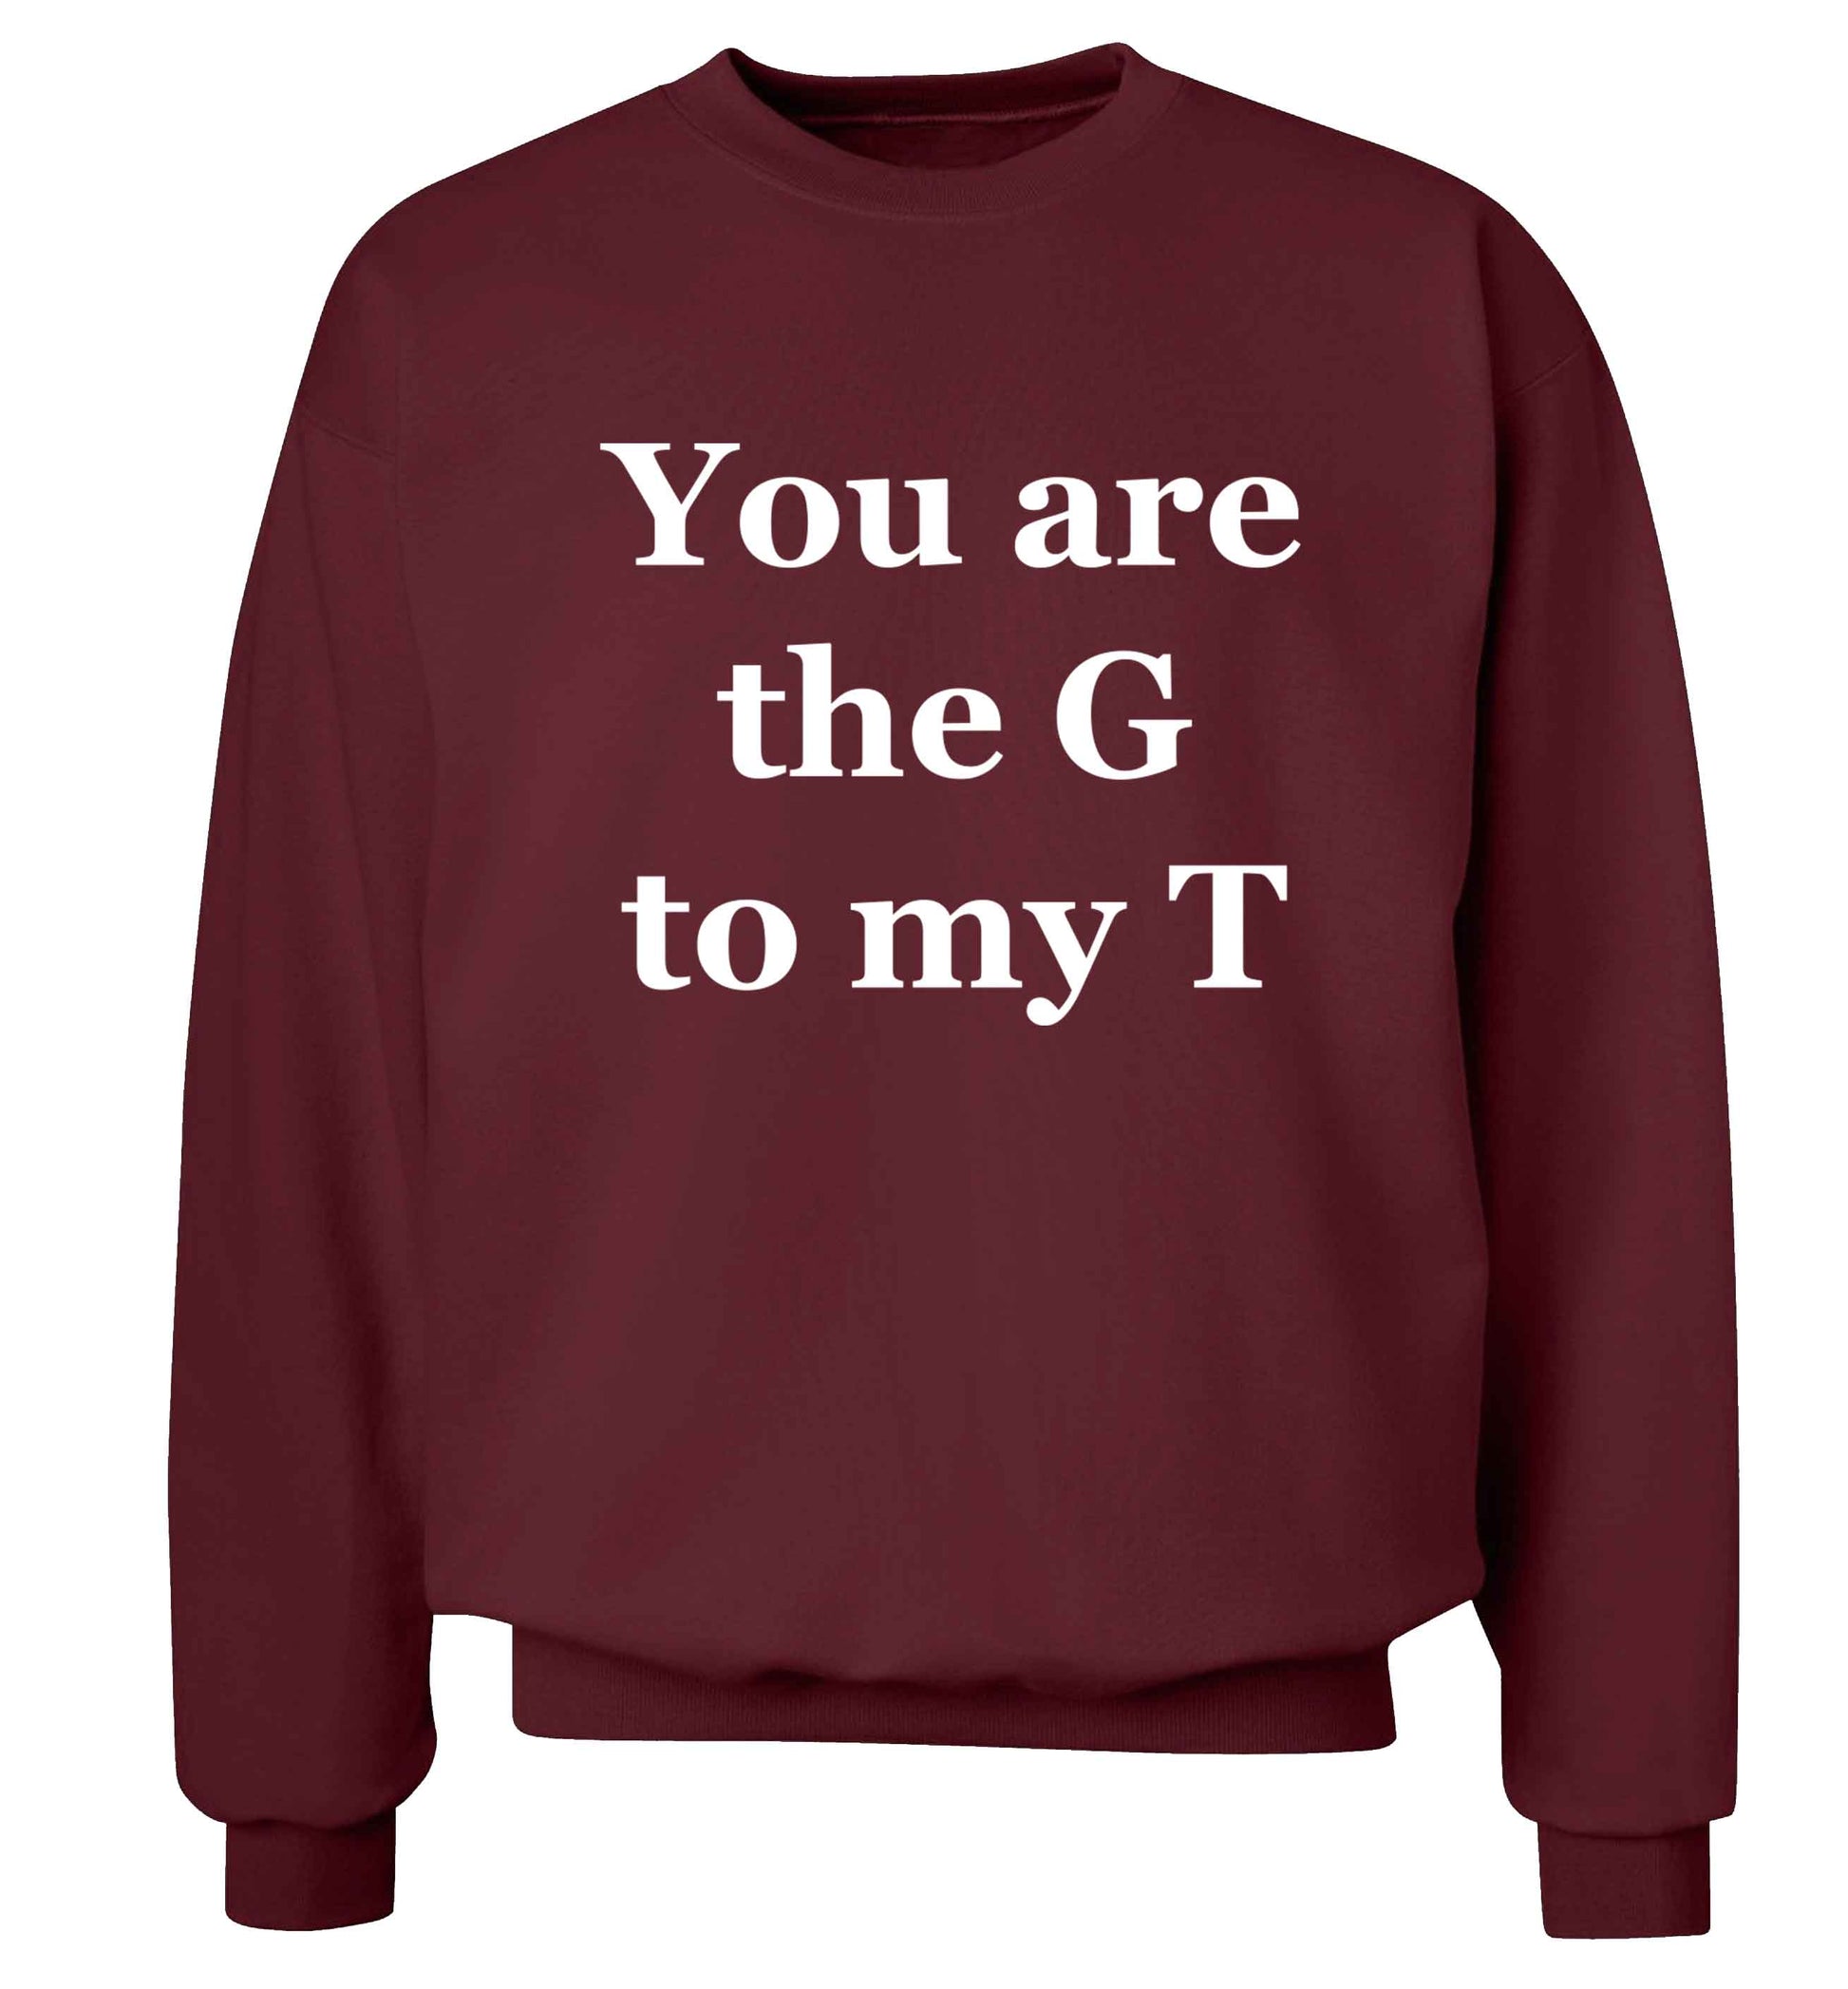 You are the G to my T Adult's unisex maroon Sweater 2XL